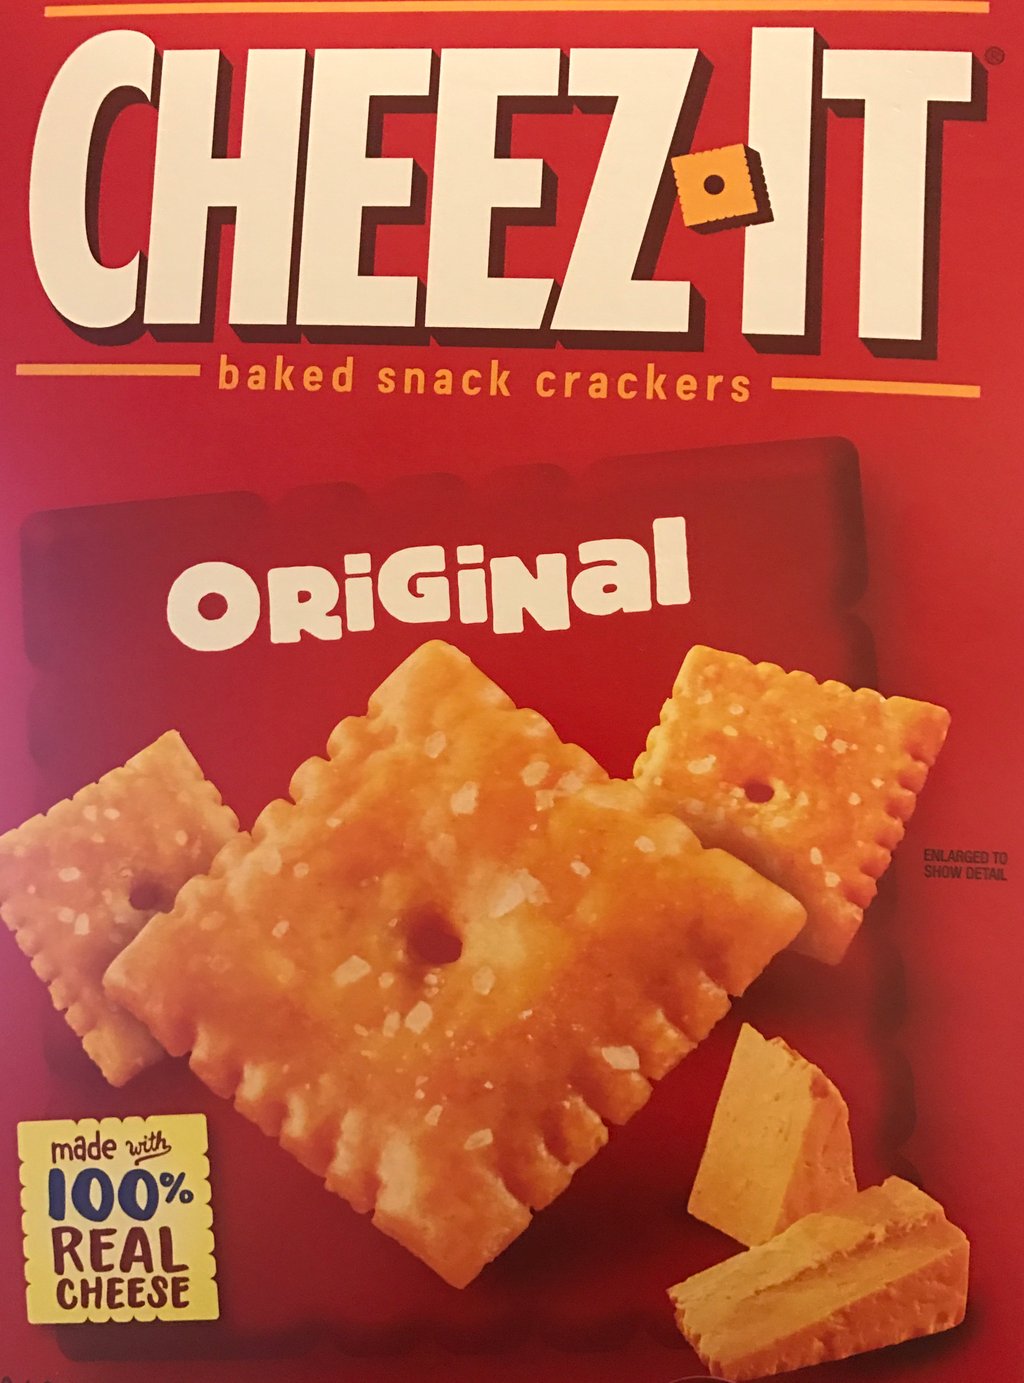 The Unofficial Ranking of Cheez It Flavors